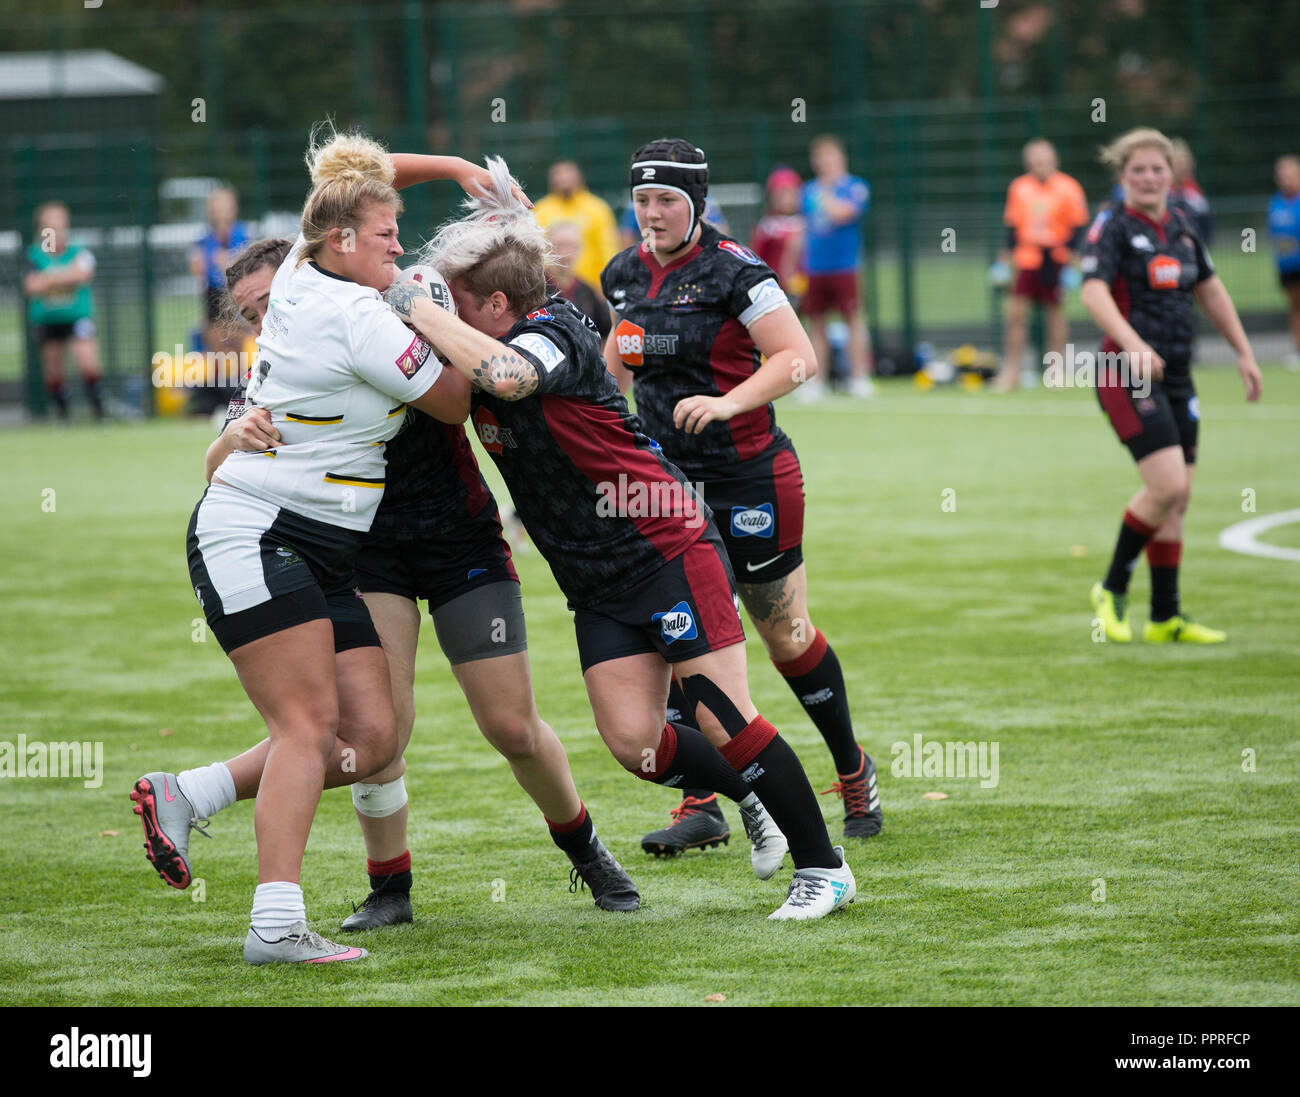 Ladies rugby team players fighting for the ball in a tackle during a sports match Stock Photo